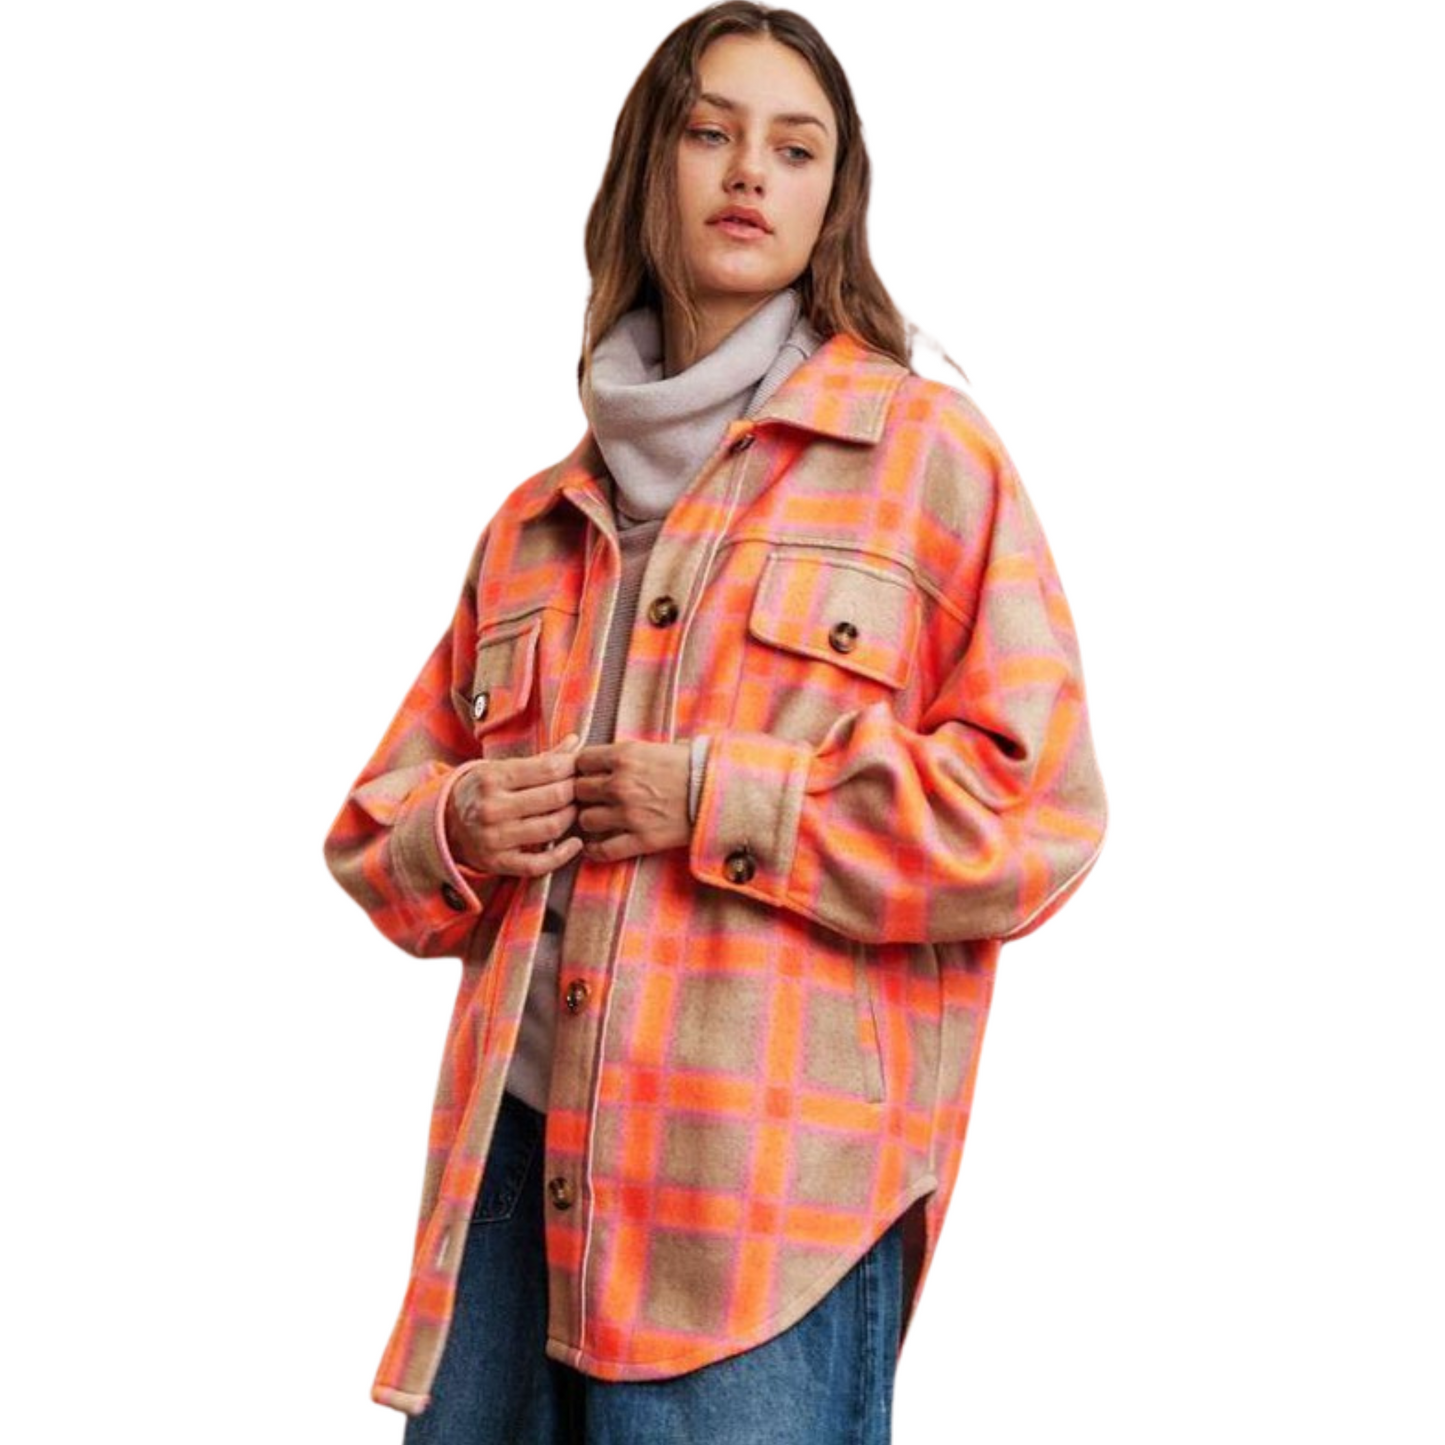 Stay warm in style with this pink and orange Plaid Contrast Shacket. Crafted from fluffy TEDDY BEAR FAUX FUR and featuring a buttoned front closure, this chic shacket adds a cozy layer to your look. Perfect for cold winter days.